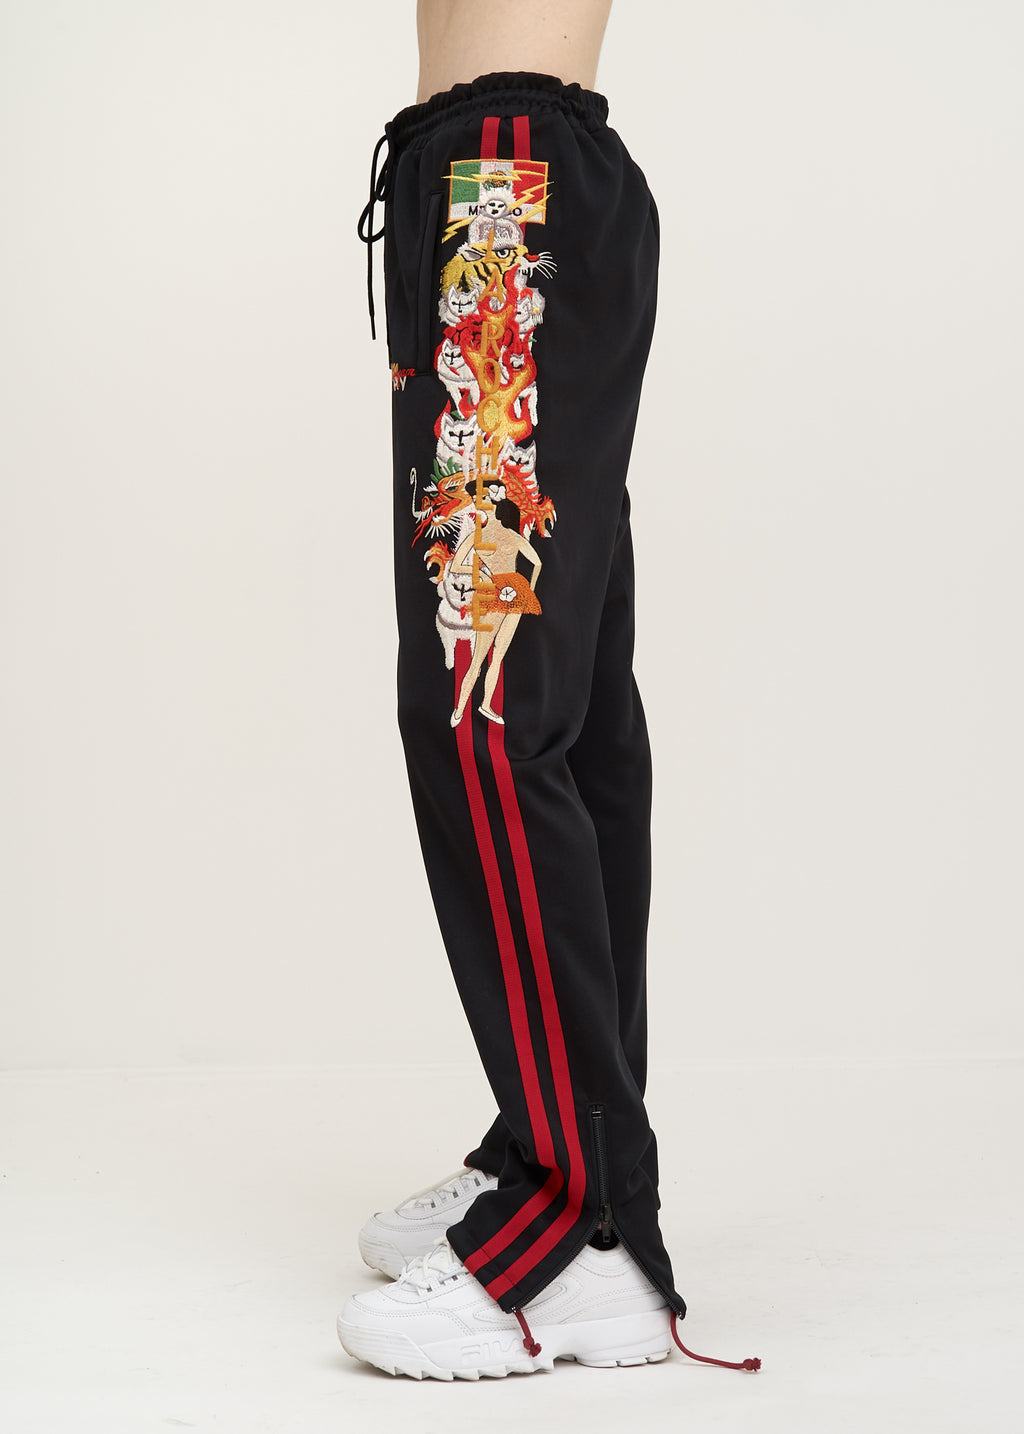 doublet ダブレット 17AW CHAOS EMBROIDERY TRACK PANTS カオス刺?ベロアトラックパンツ ネイビー 17AW13PT60